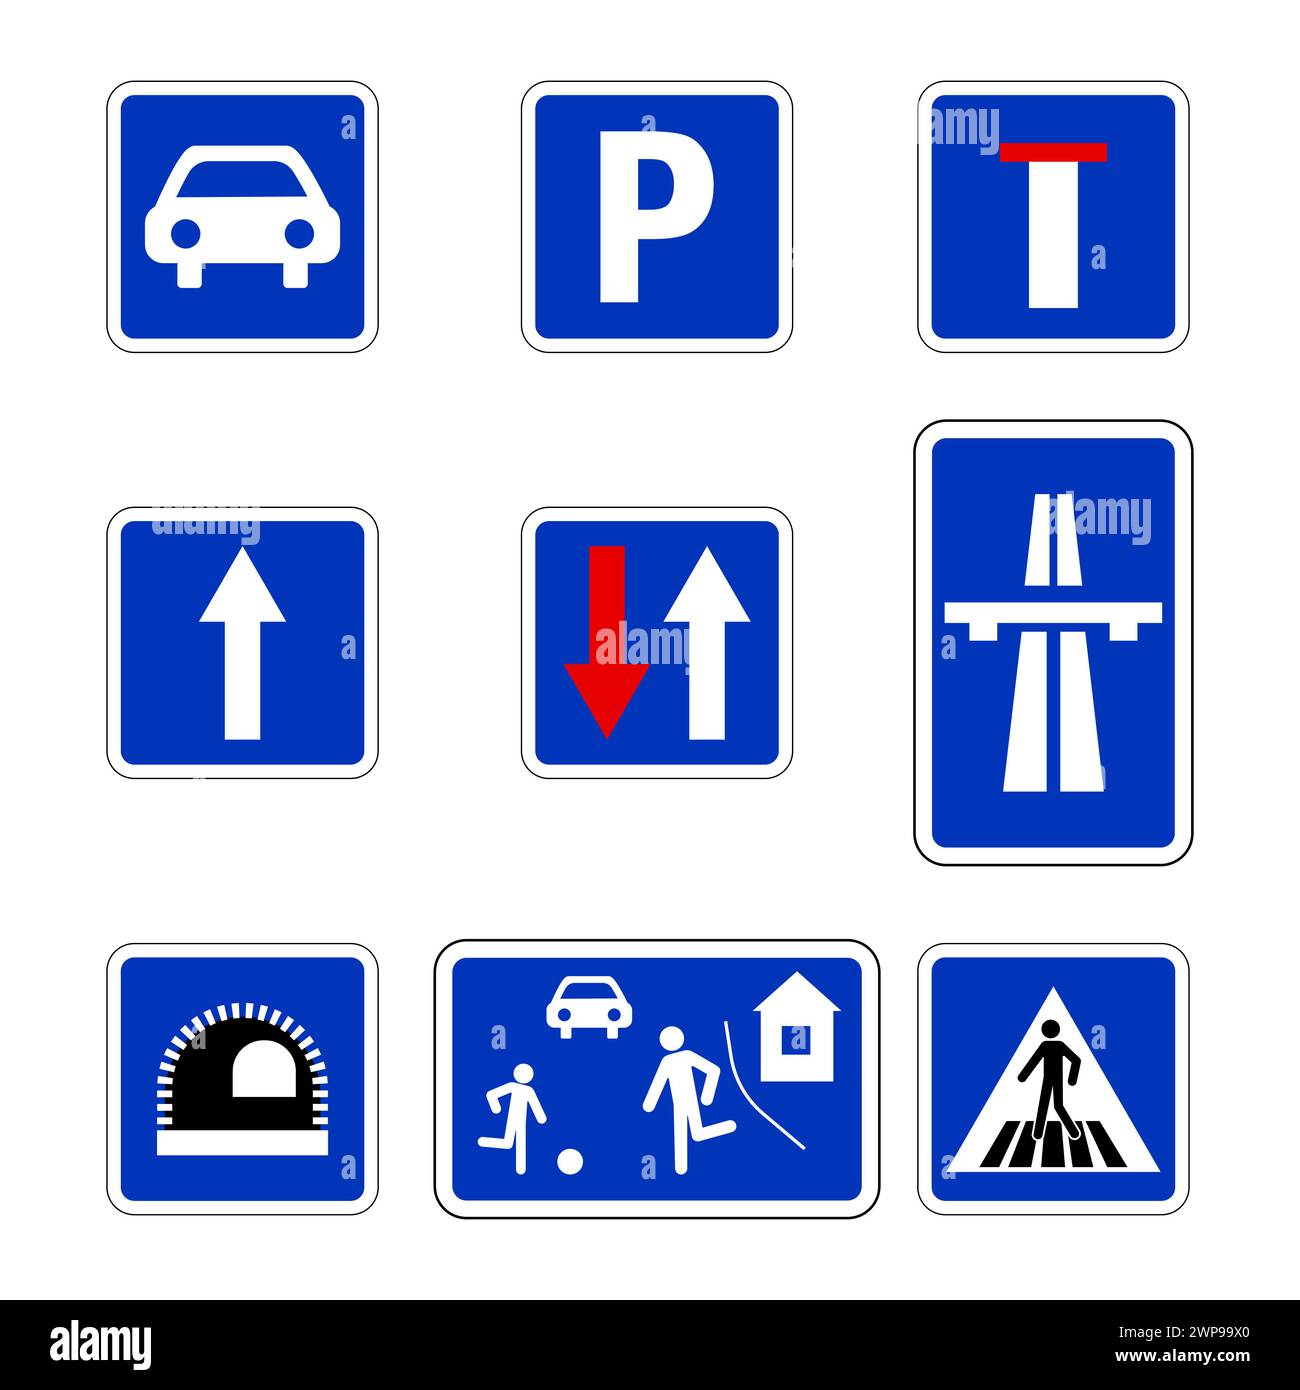 Priority road signs. Mandatory road signs. Traffic Laws. Vector illustration. stock image. EPS 10. Stock Vector